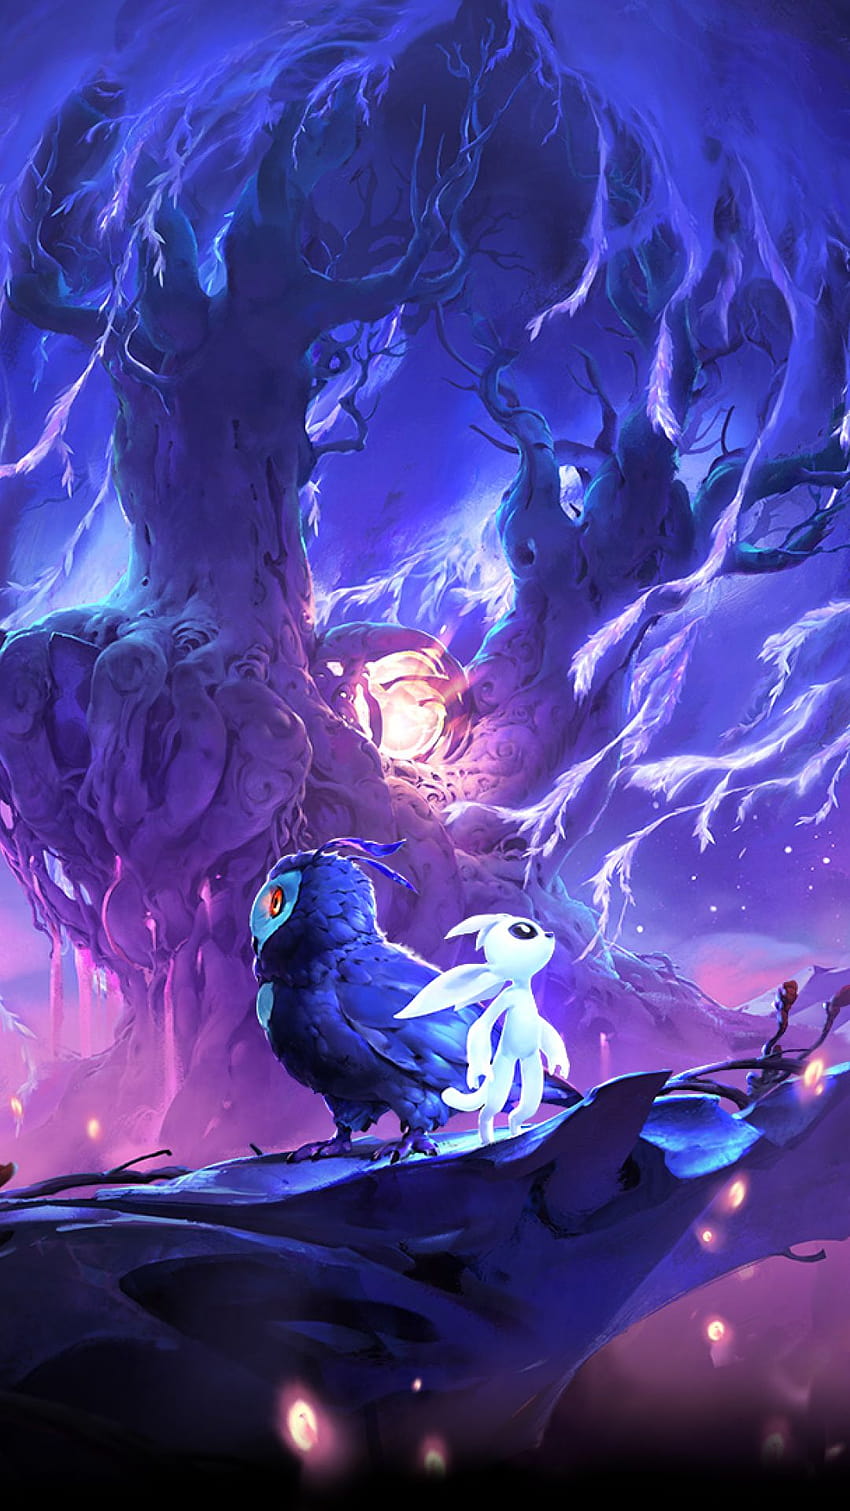 1080x1920 Ori and The Will Of The Wisps Iphone 7, 6s, 6 Plus dan Pixel XL ,One Plus 3, 3t, 5 , Games , dan Backgrounds, ori android wallpaper ponsel HD